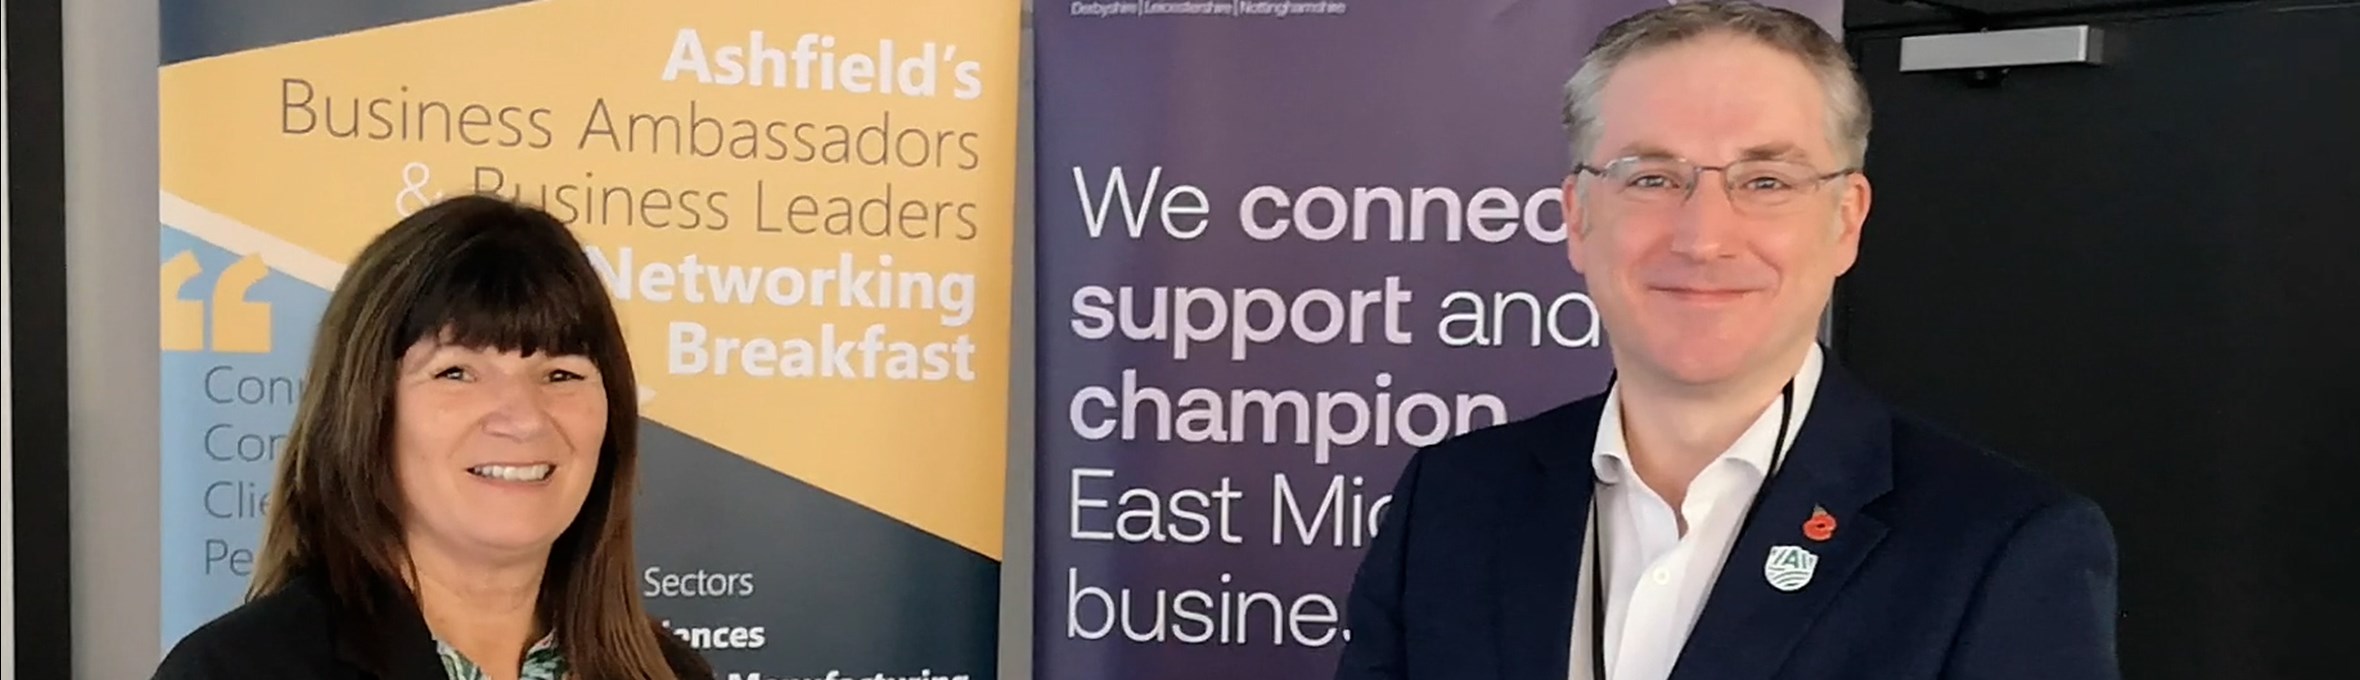 Councillor Matthew Relf and Diane Beresford from the East Midlands Chamber